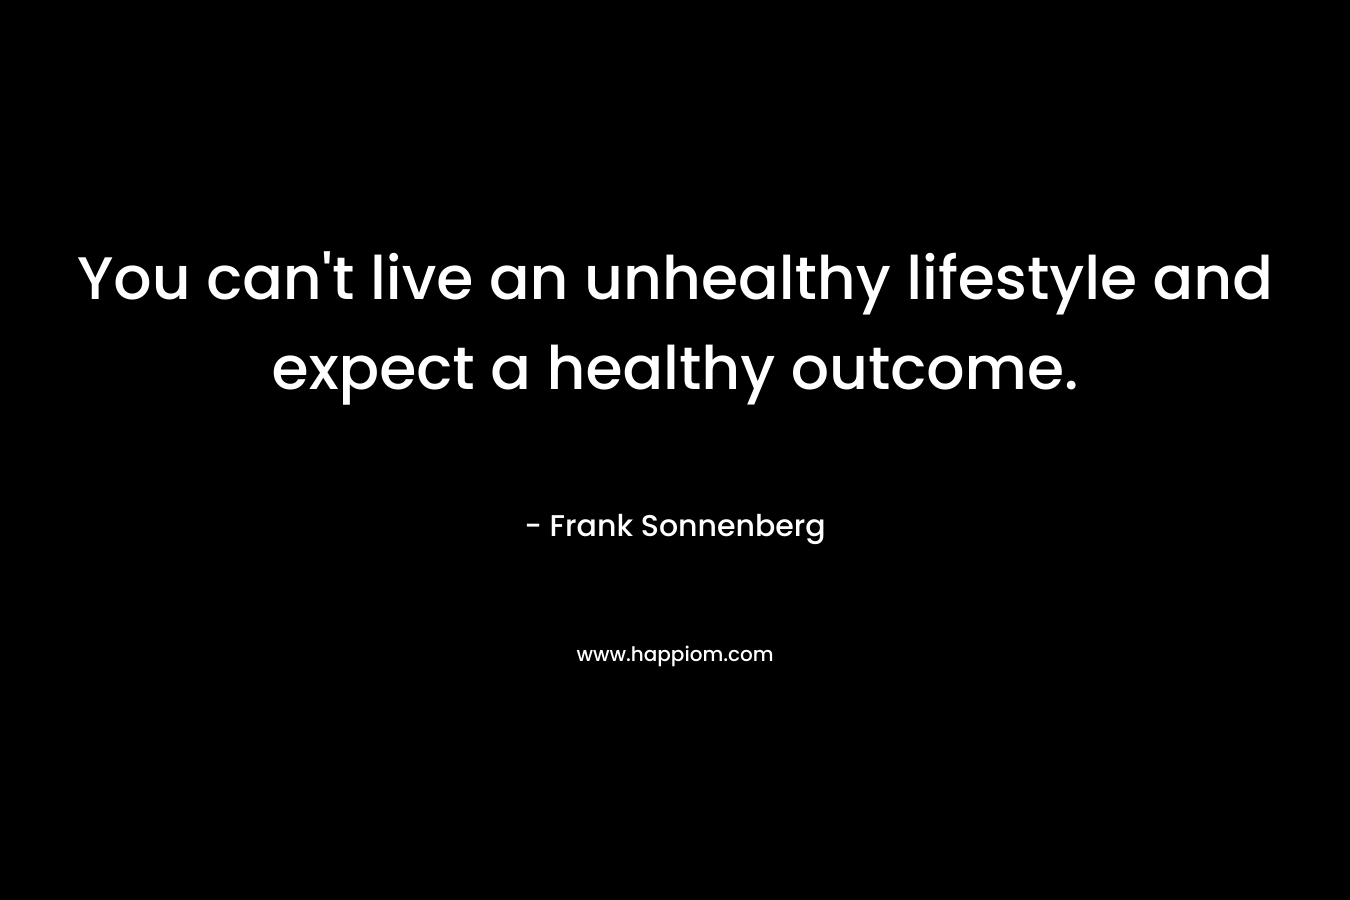 You can't live an unhealthy lifestyle and expect a healthy outcome.